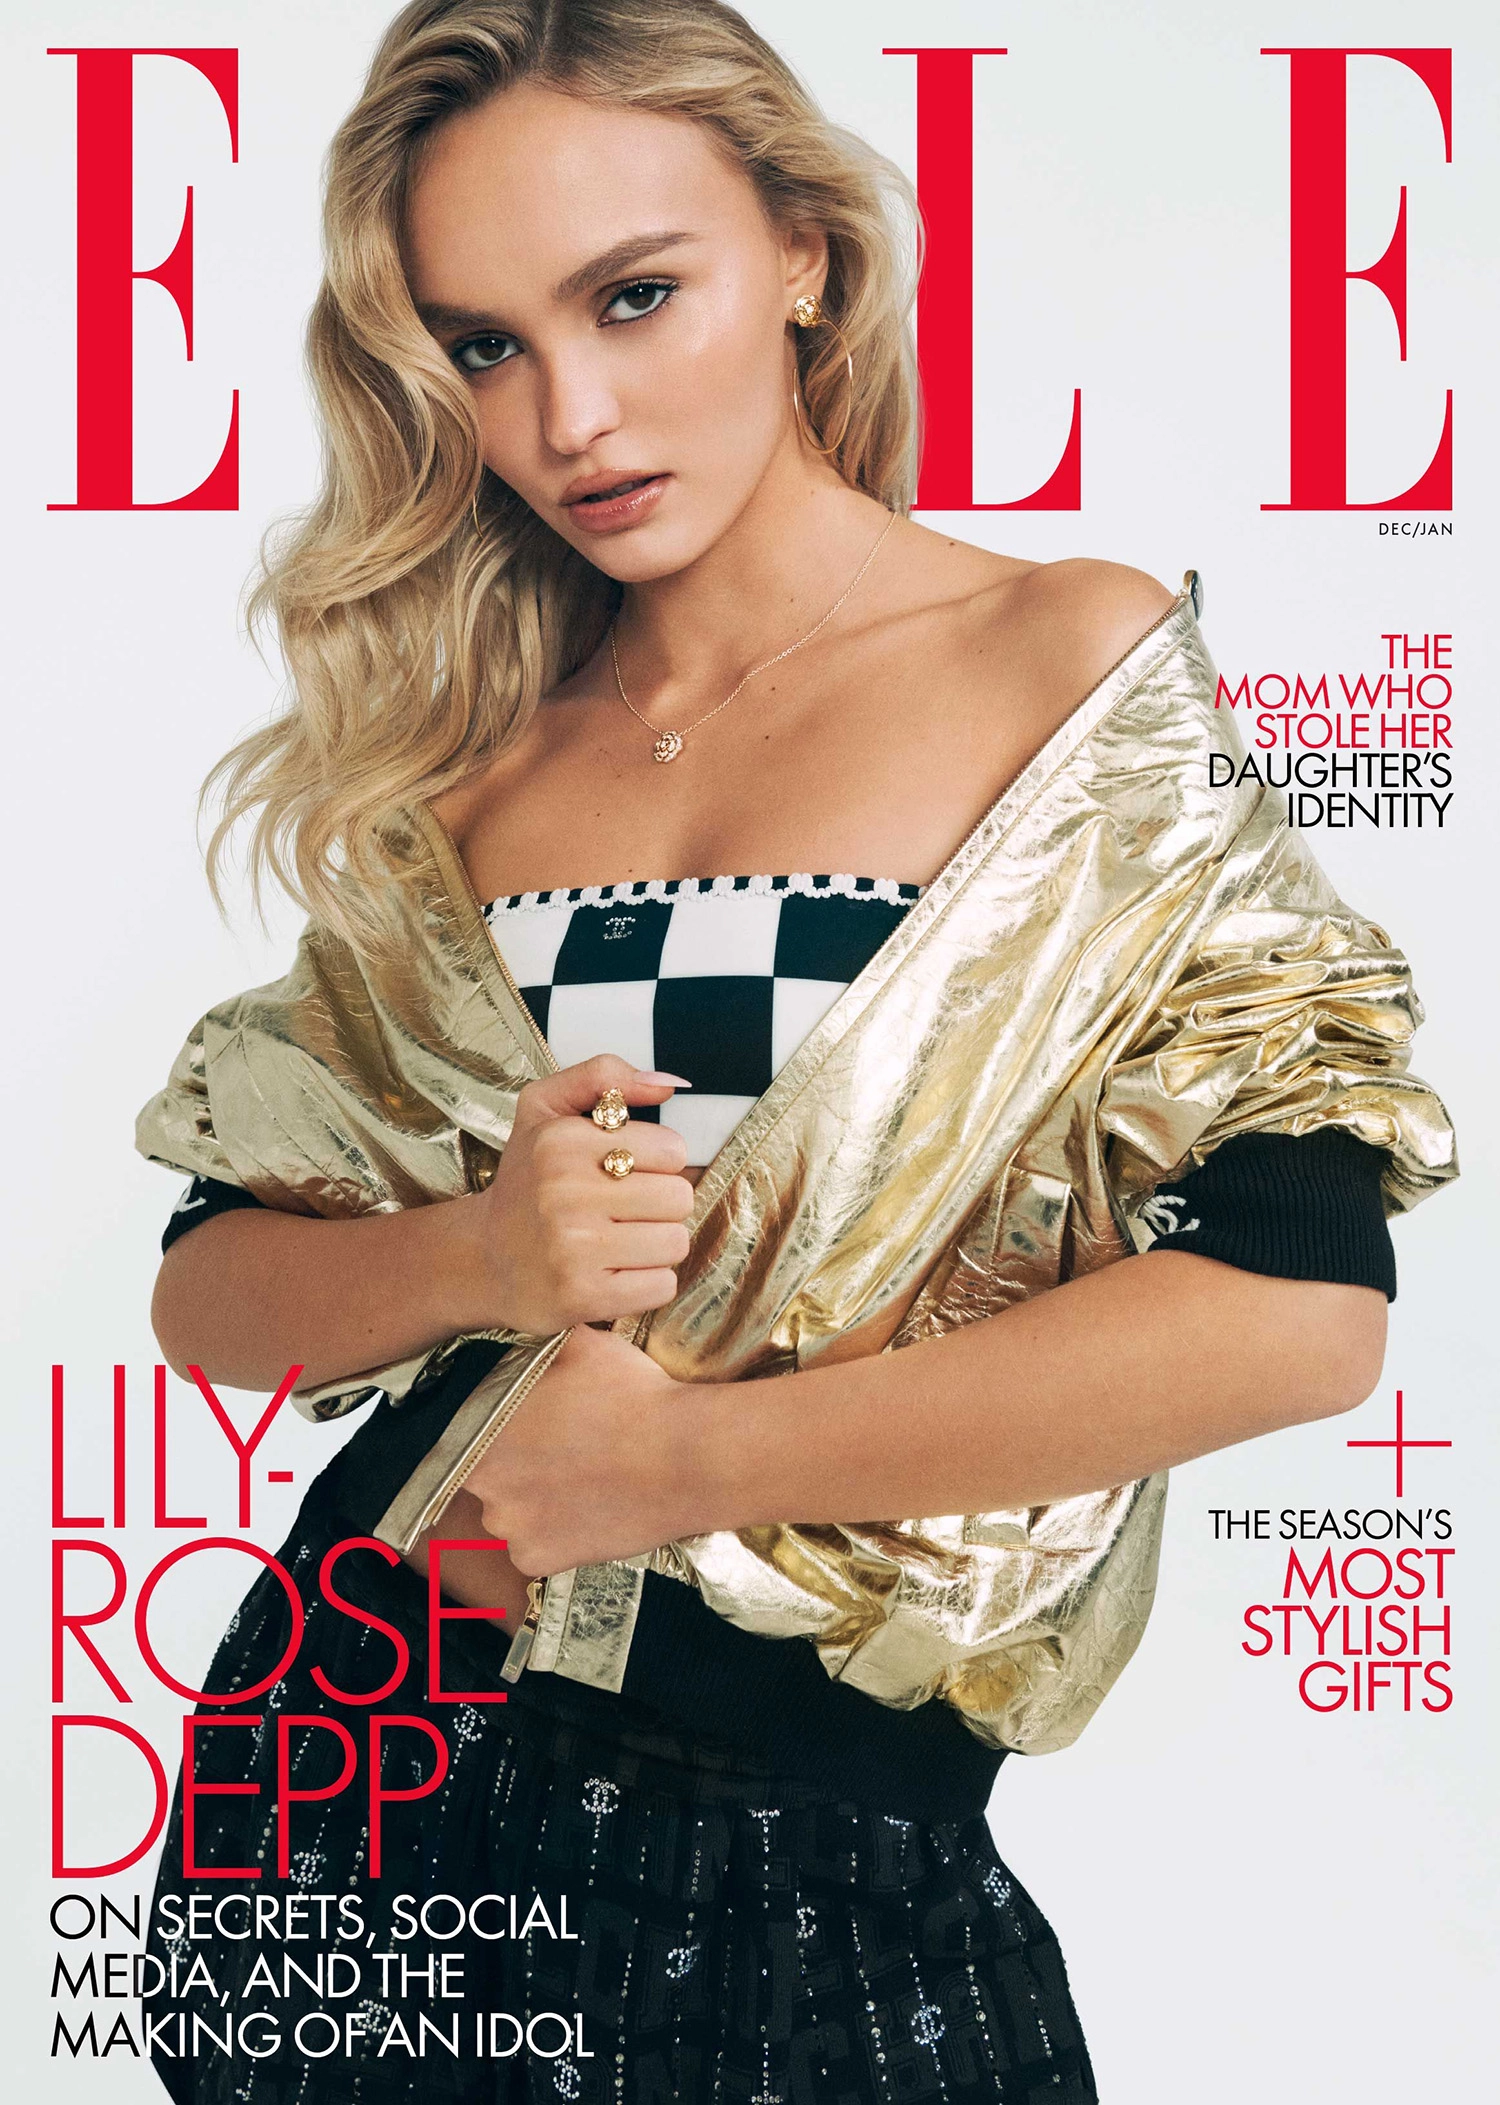 Lily-Rose Depp covers Elle US December 2022/January 2023 by Felix Cooper